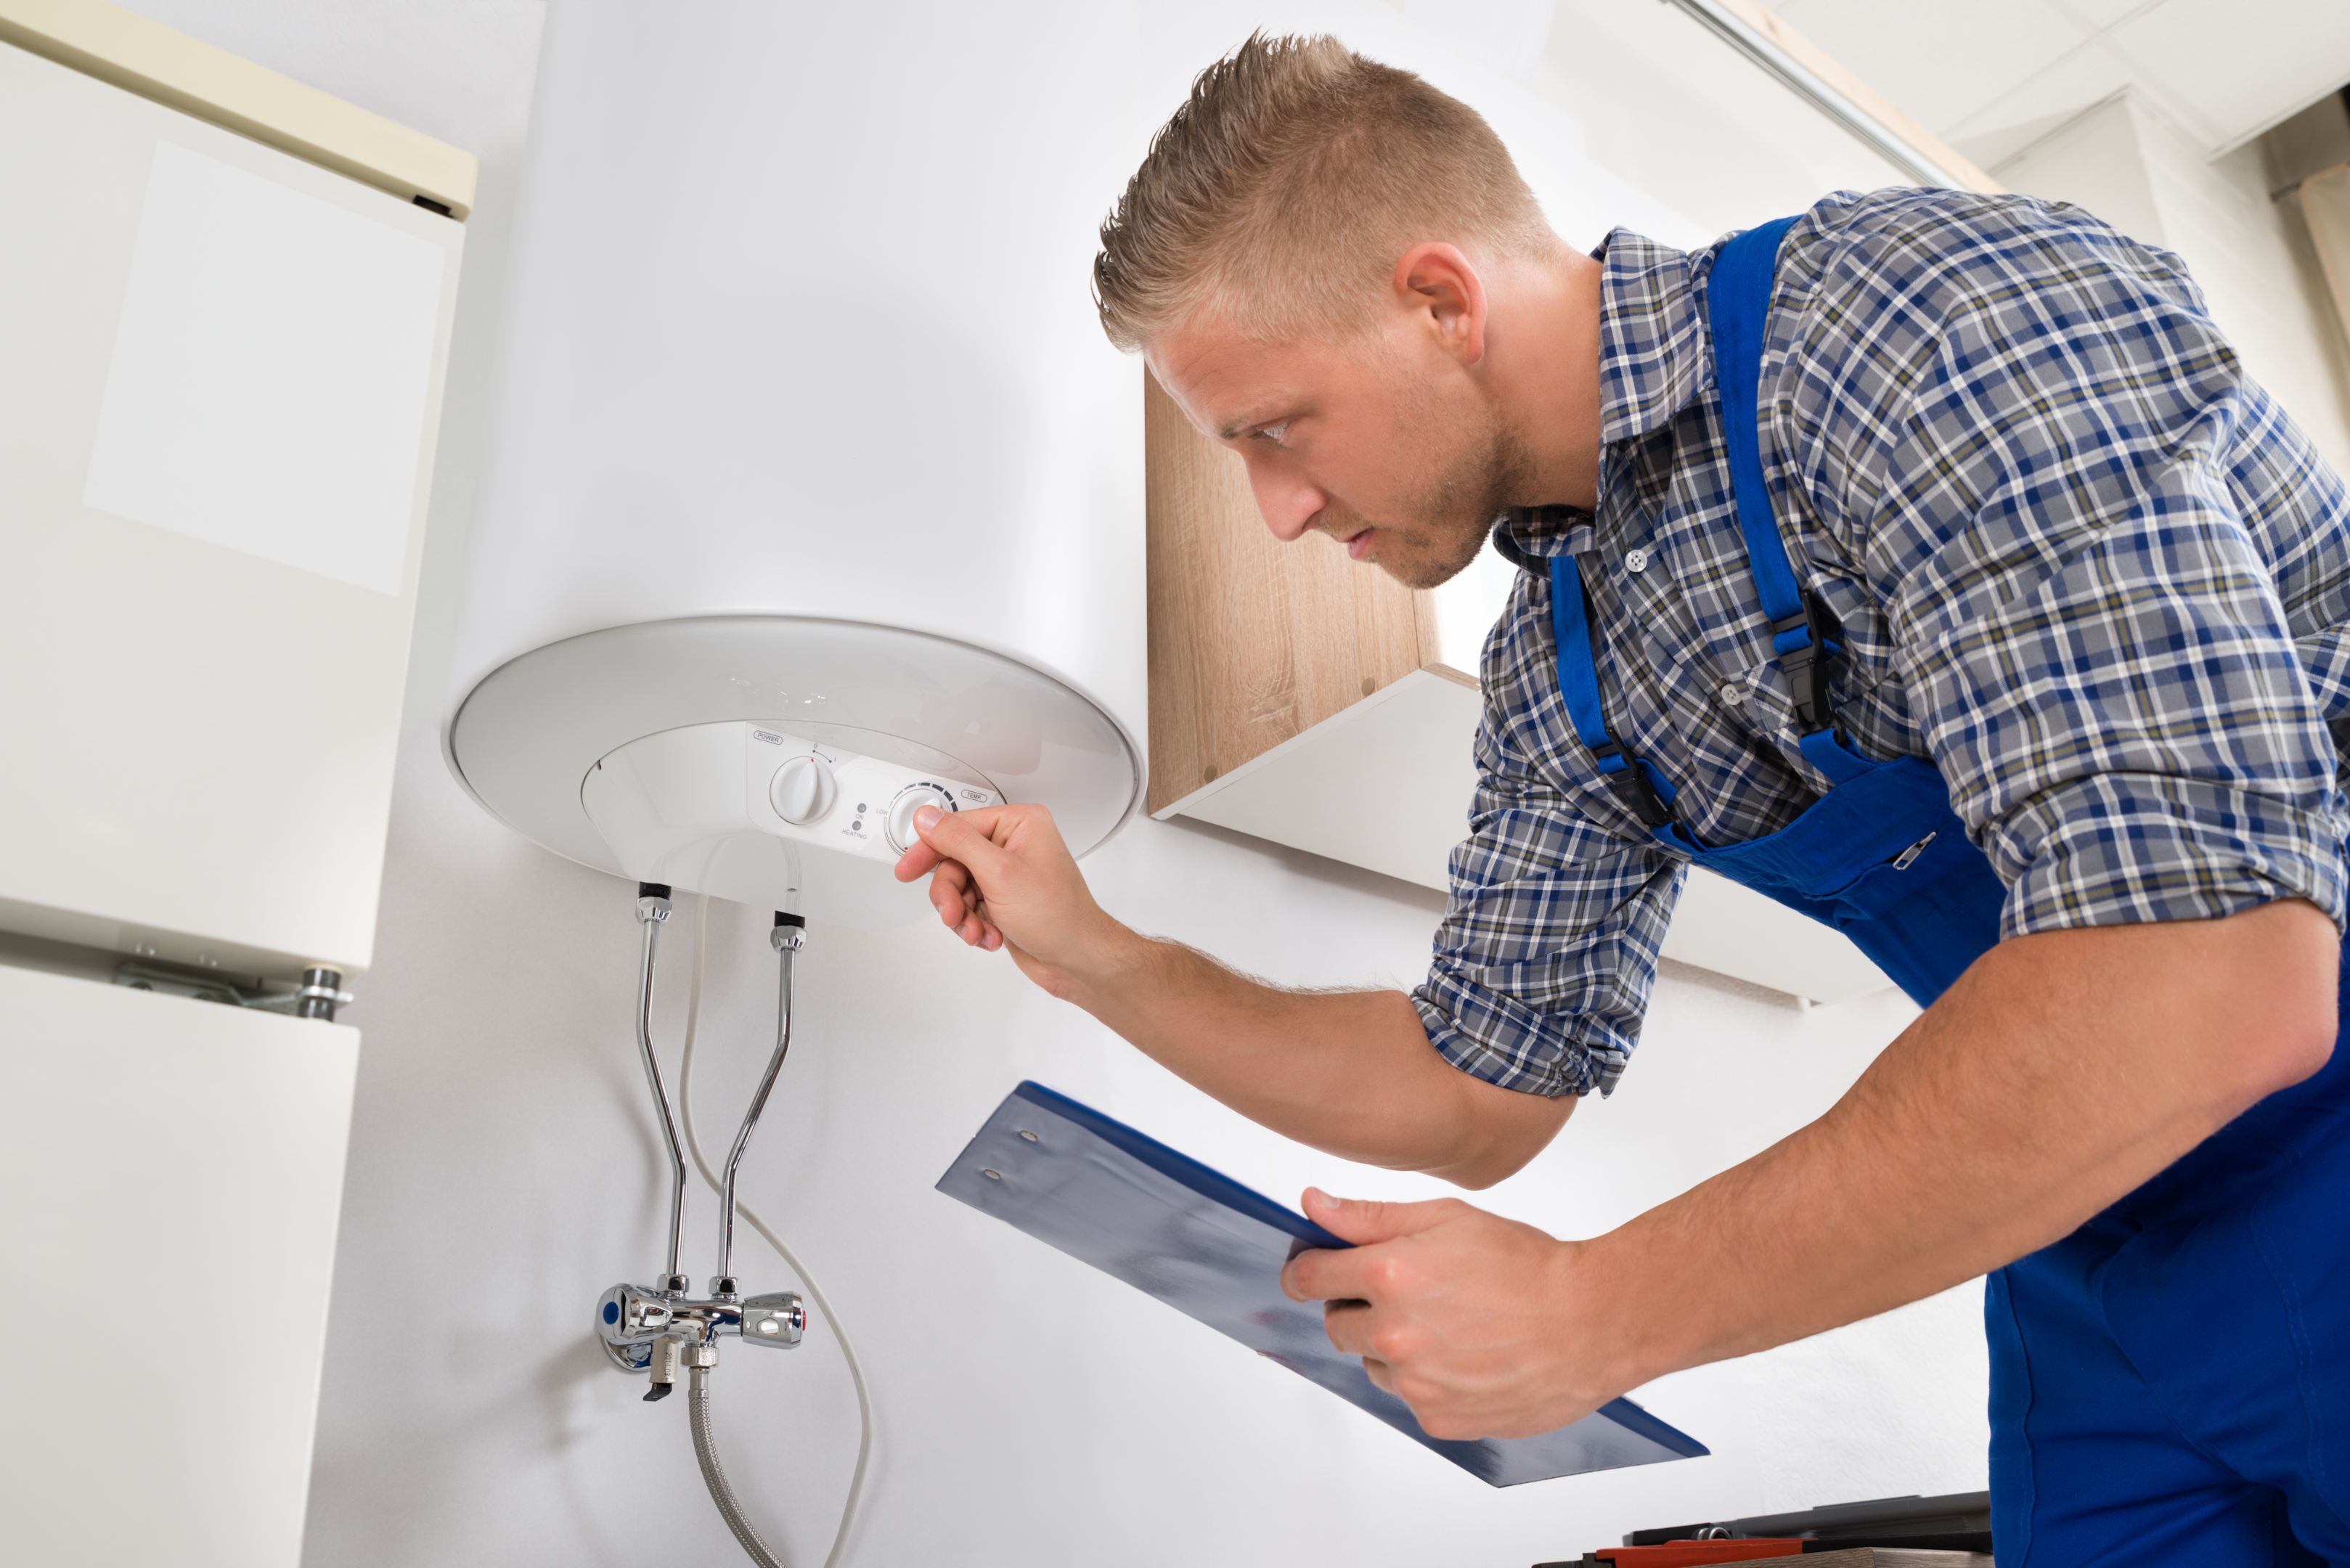 You might need to adjust the temperature on your hot water heater to allow it to effectively heat water